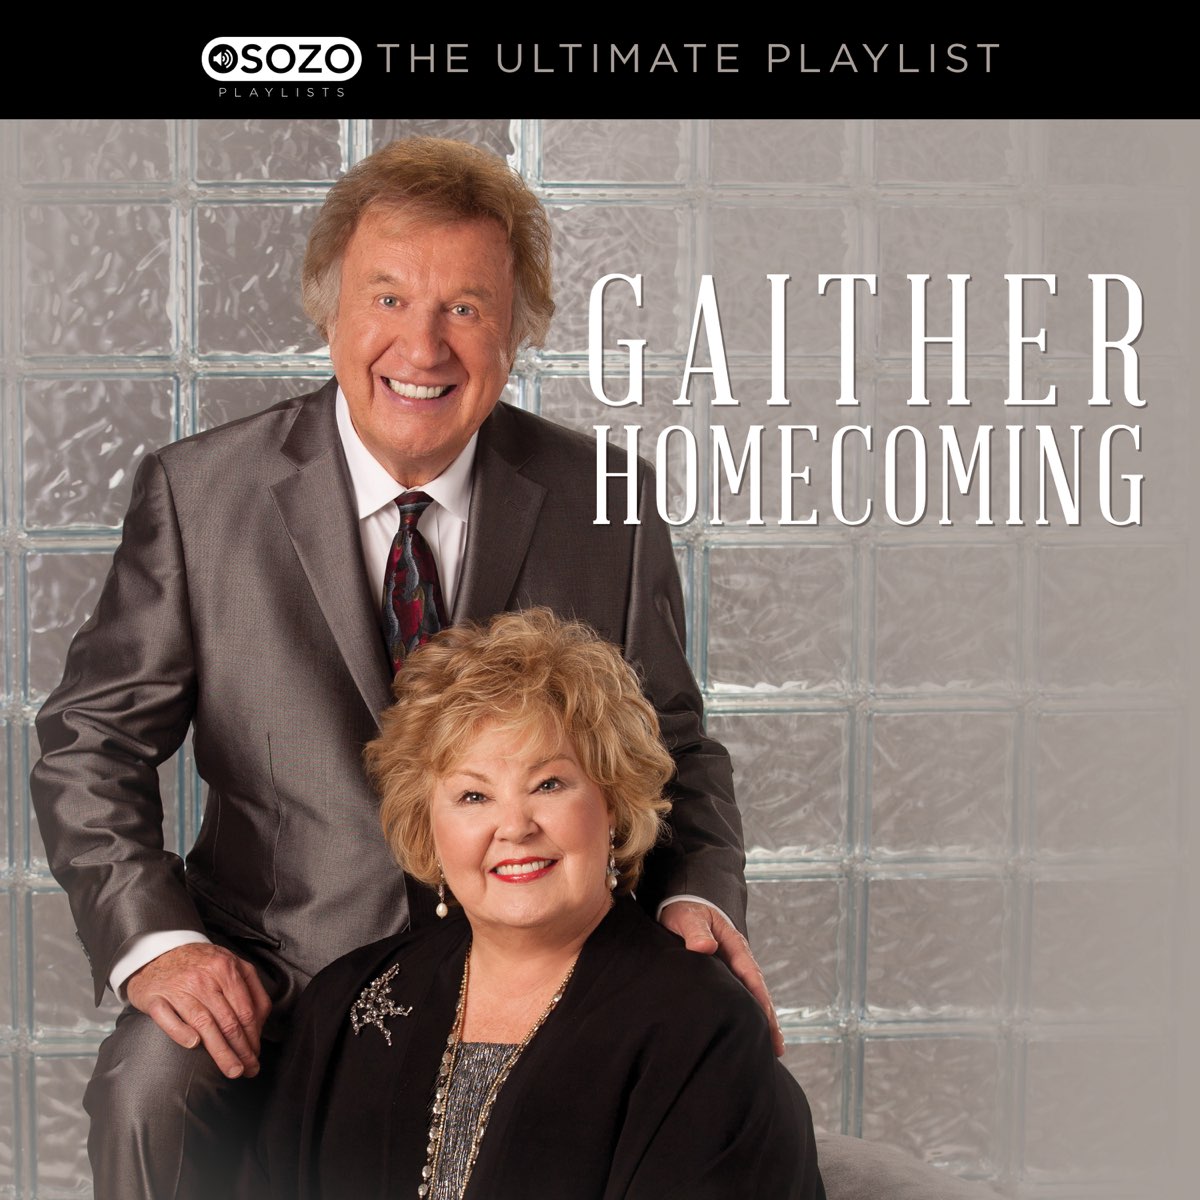 Ultimate playlist. Yes, i know Bill & Gloria Gaither.